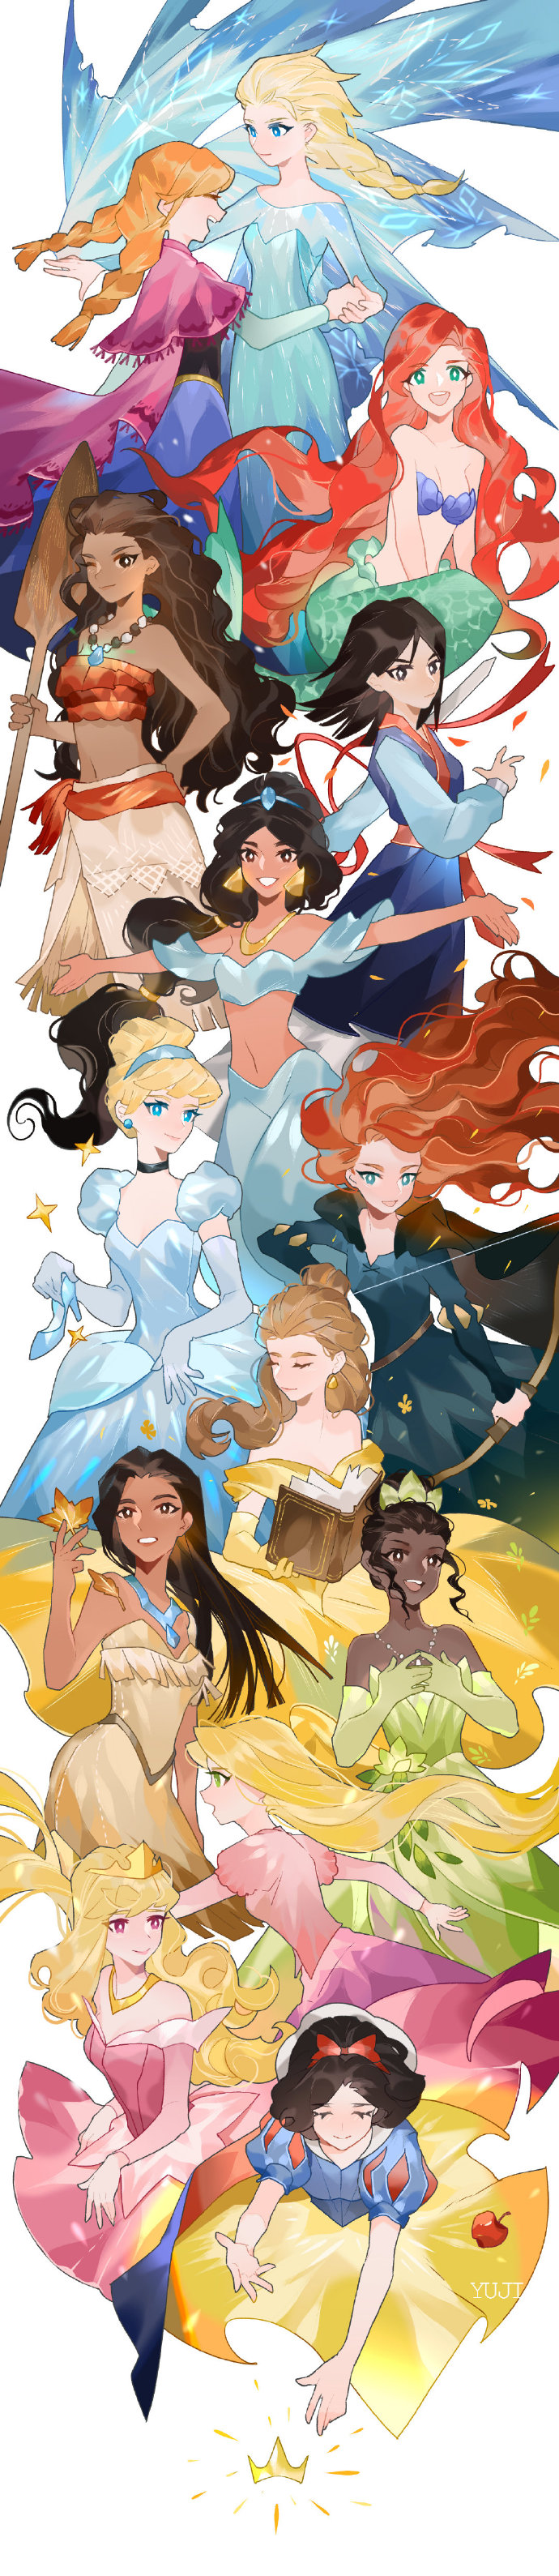 6+girls absurdres aladdin_(disney) anna_(frozen) arabian_clothes ariel_(disney) aurora_(disney) beauty_and_the_beast belle_(disney) black_hair blonde_hair book bow bow_(weapon) brave_(pixar) brown_hair cape chinese_clothes cinderella cinderella_(disney) company_connection crossover dark_skin disney dress elsa_(frozen) fa_mulan_(disney) frozen_(disney) hair_bow hairband hand_holding highres jasmine_(disney) jewelry leaf long_hair long_image looking_at_viewer merida_(brave) mermaid midriff moana_(movie) moana_waialiki monster_girl mulan multiple_girls native_american navel necklace oar outstretched_arms pocahontas pocahontas_(disney) puffy_short_sleeves puffy_sleeves rapunzel_(disney) shell shell_bikini short_sleeves siblings sisters sleeping_beauty smile snow_white_(disney) snow_white_and_the_seven_dwarfs sword tall_image tangled the_little_mermaid the_princess_and_the_frog tiana_(the_princess_and_the_frog) tiara very_long_hair weapon yuji_(fantasia)